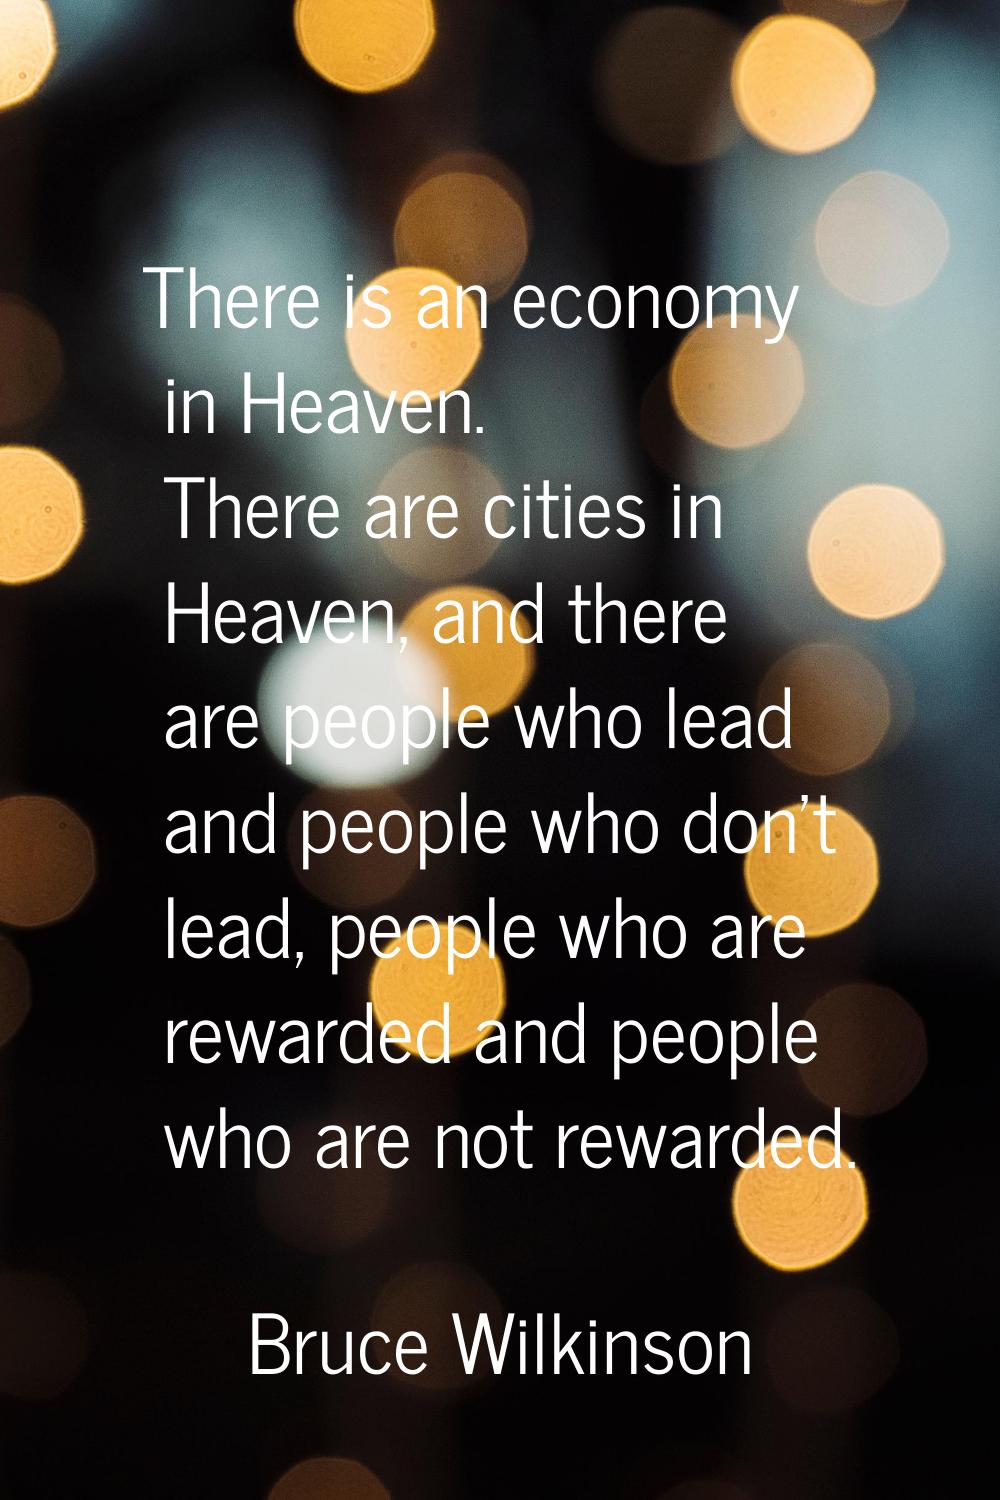 There is an economy in Heaven. There are cities in Heaven, and there are people who lead and people